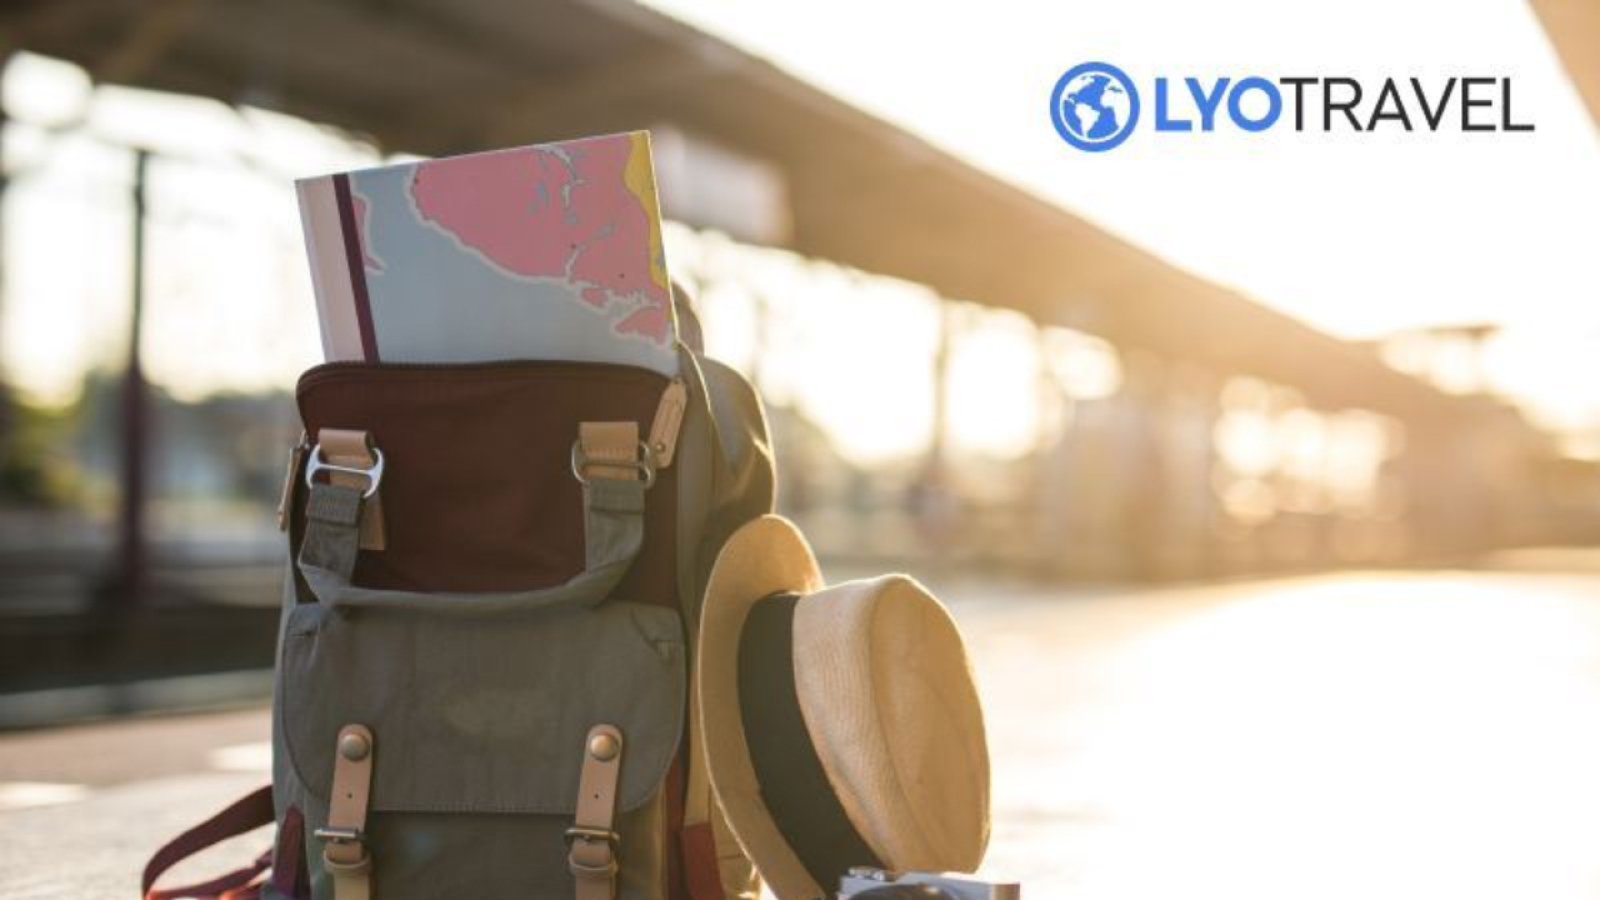 LYOTRAVEL – Book Travel and Pay with Cryptocurrencies